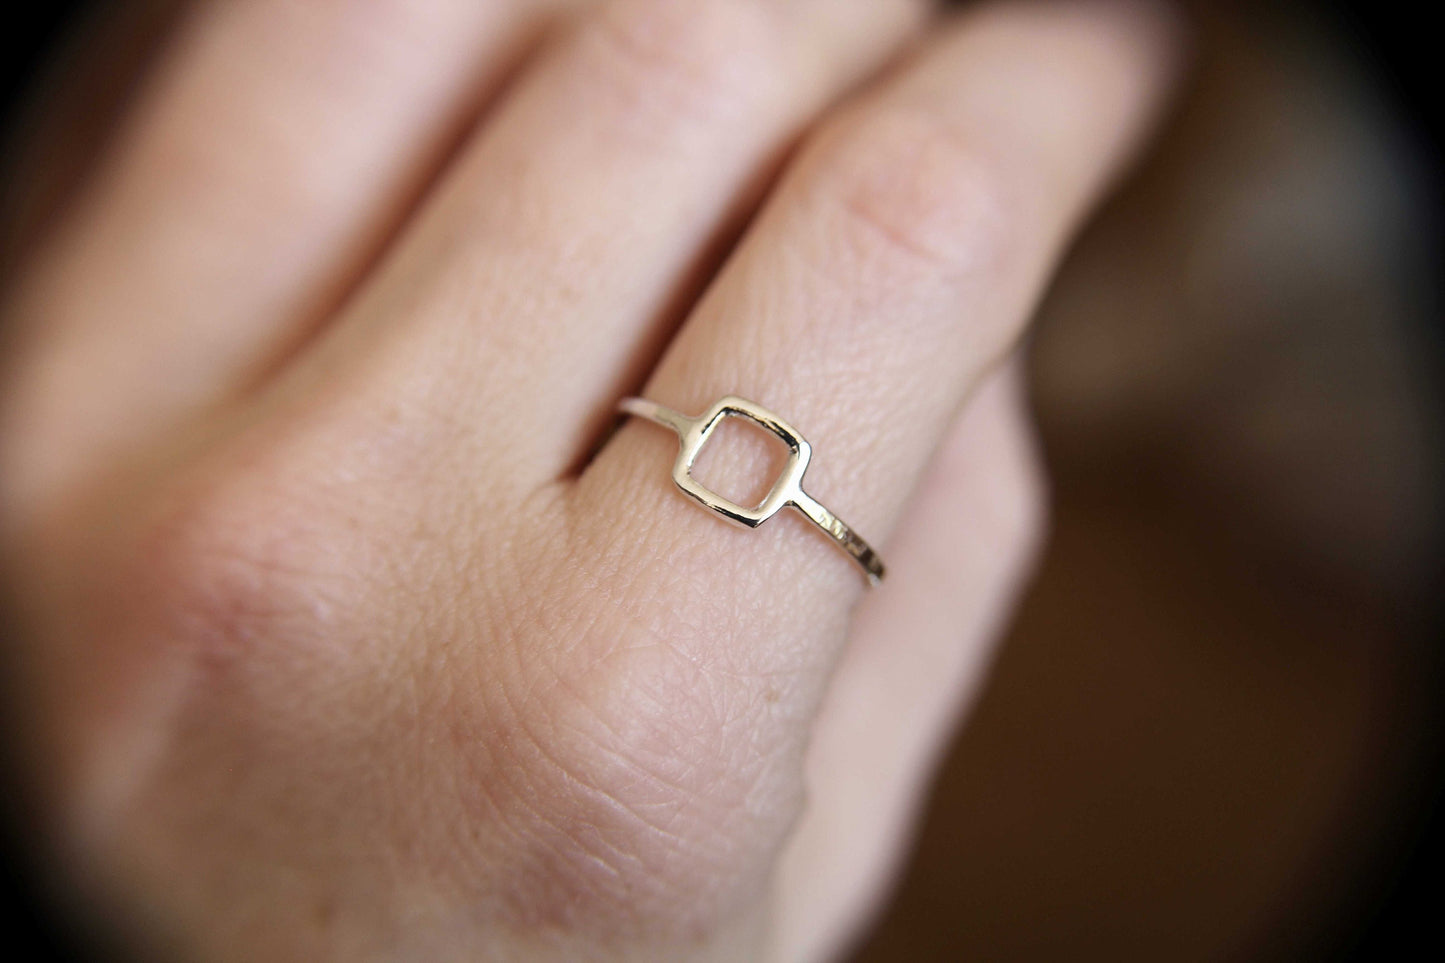 Square Ring, Stacking Rings, Modern Rings, Silver Geometric Rings,Simple Modern Rings, Open Square Ring, Minimalist Jewelry, Simple Ring